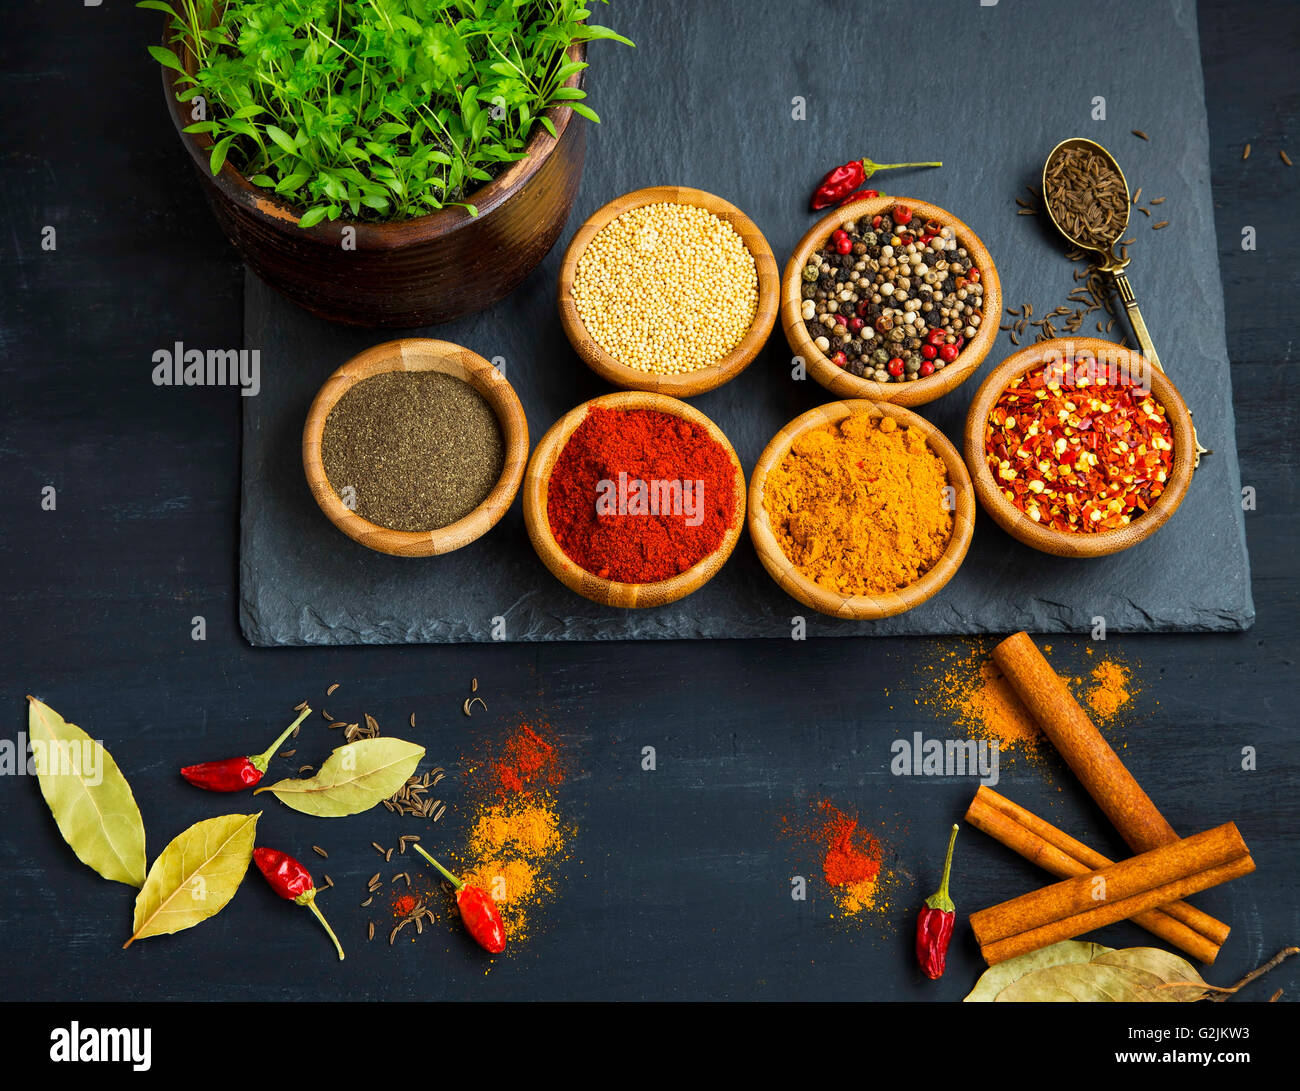 Spices powders and seeds with chili peppers and bay leaves Stock Photo